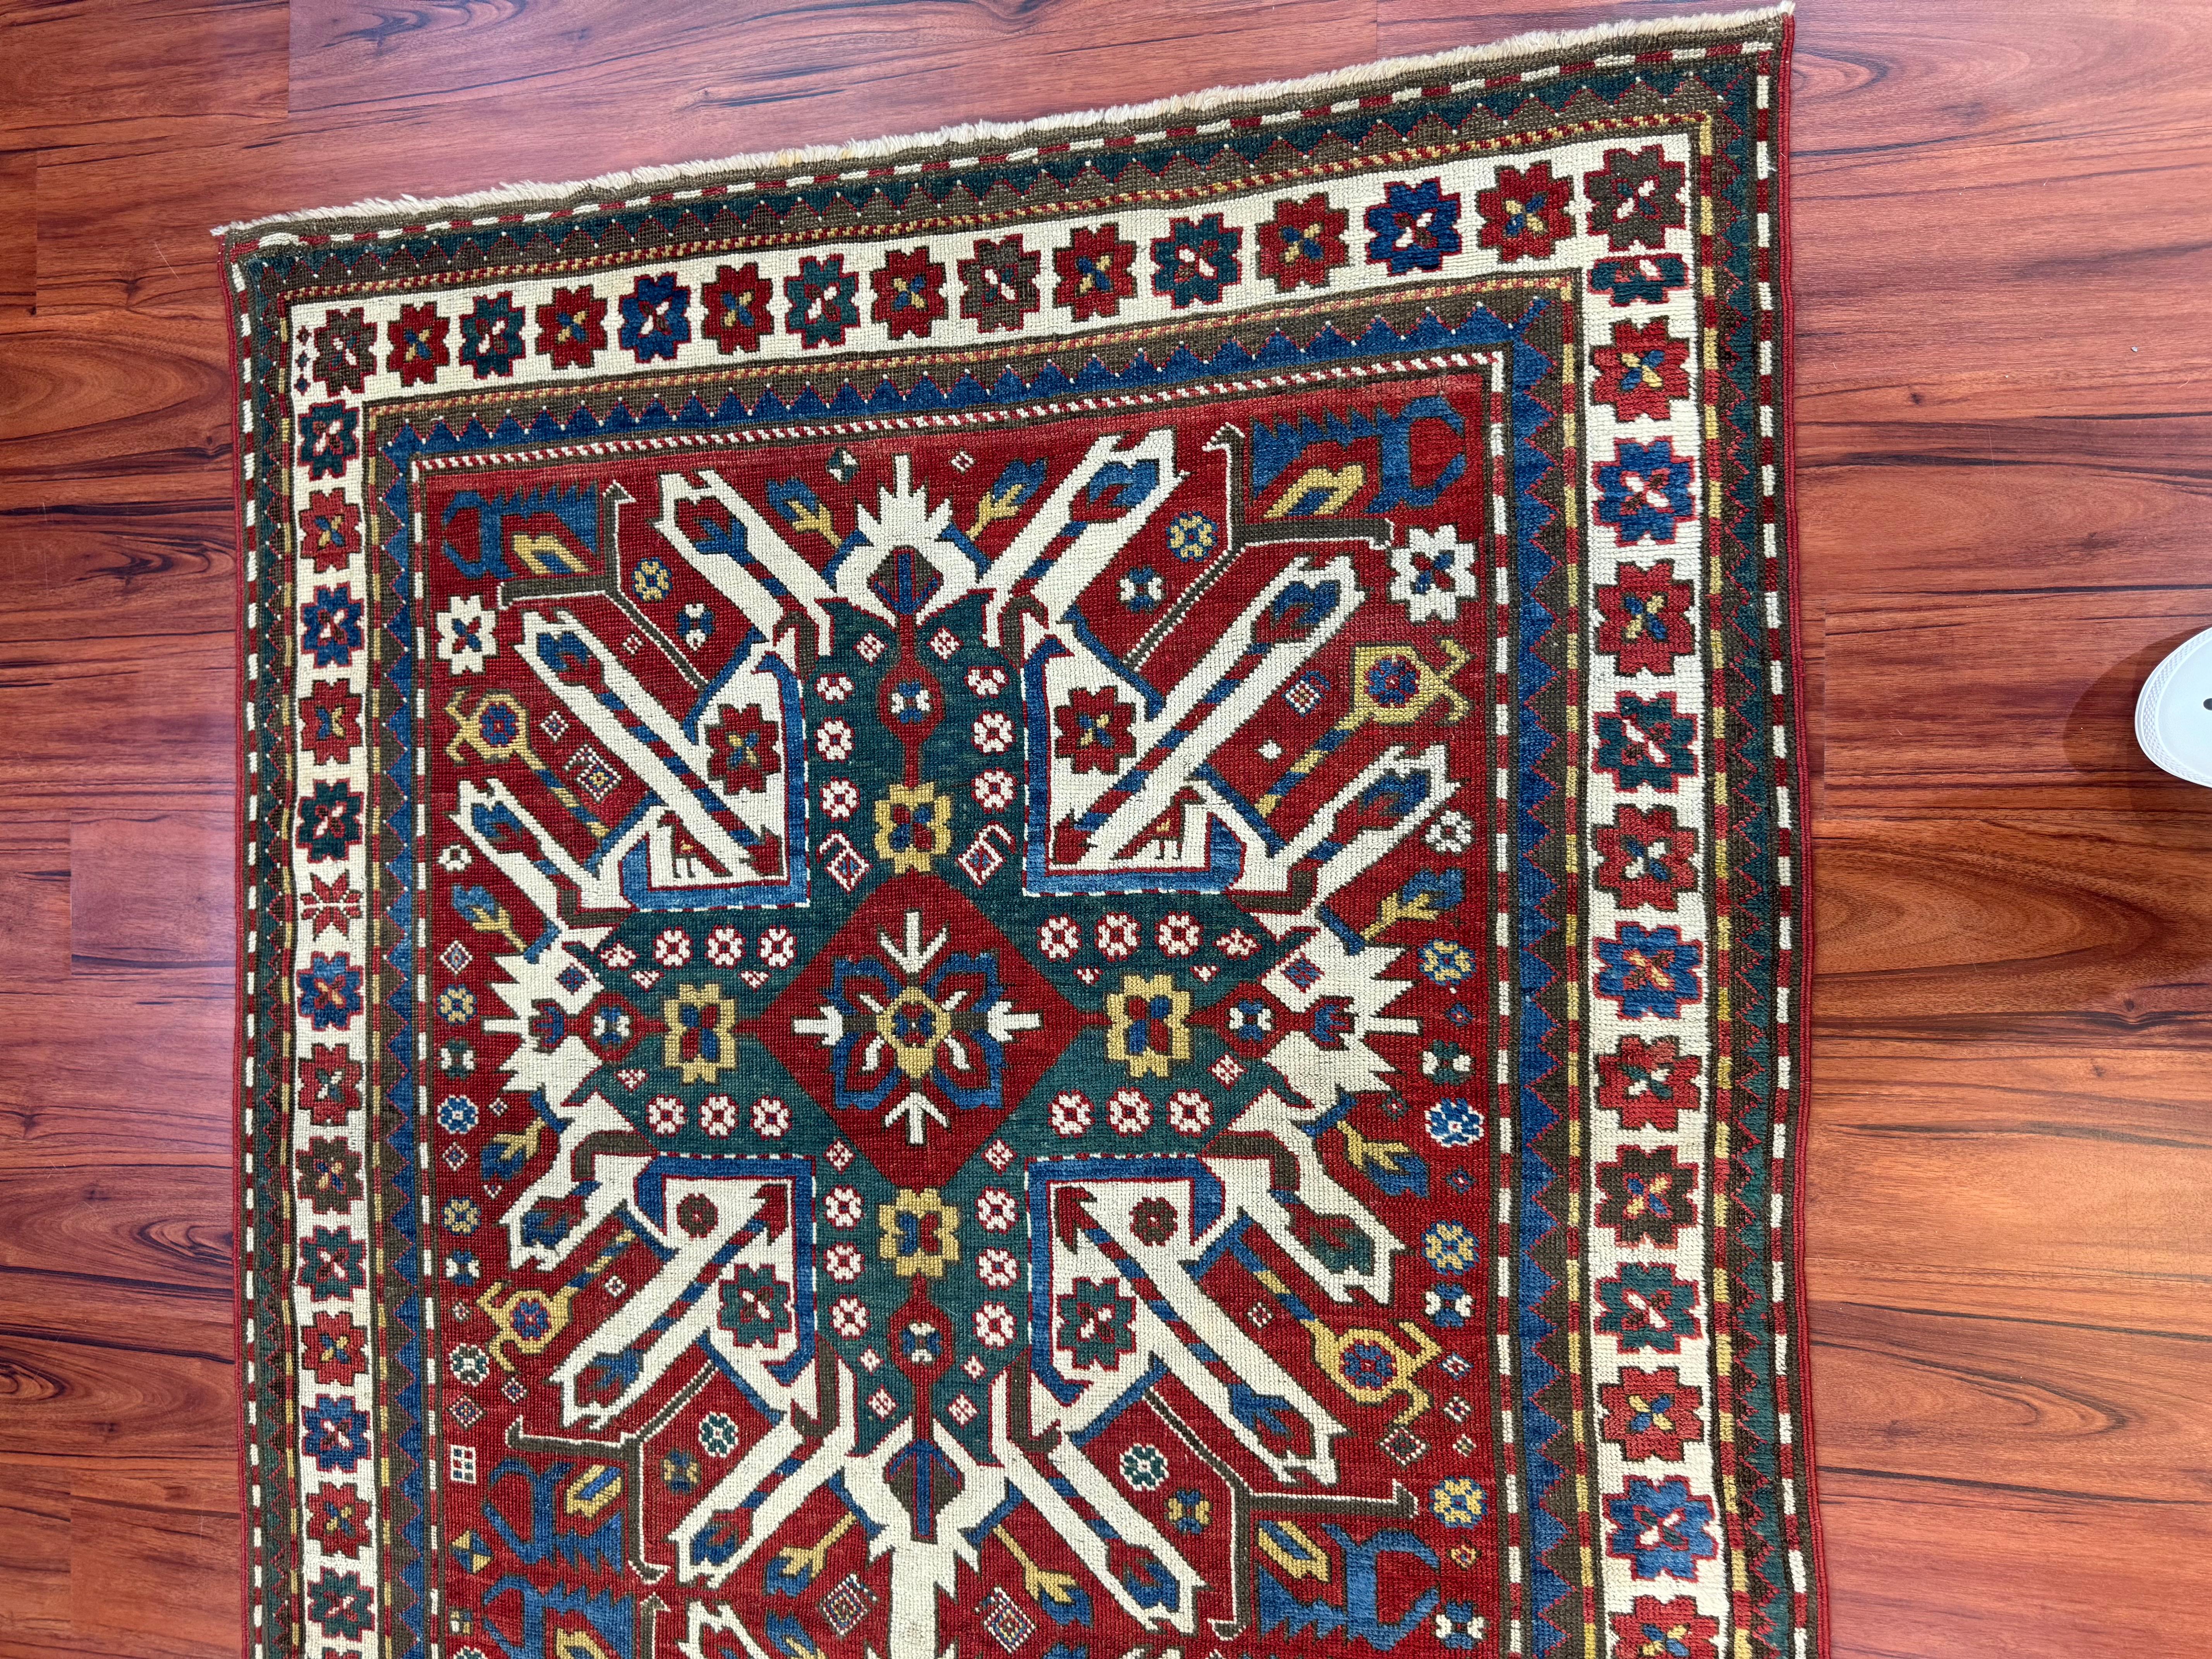 Stunning Antique Caucasian Kazak eagle Rug with measurements of 4ft 5in width by 7ft 5in length. This rug is in excellent condition considering its rich history. Feel free to message me in regards to this listing or any other on my page! 